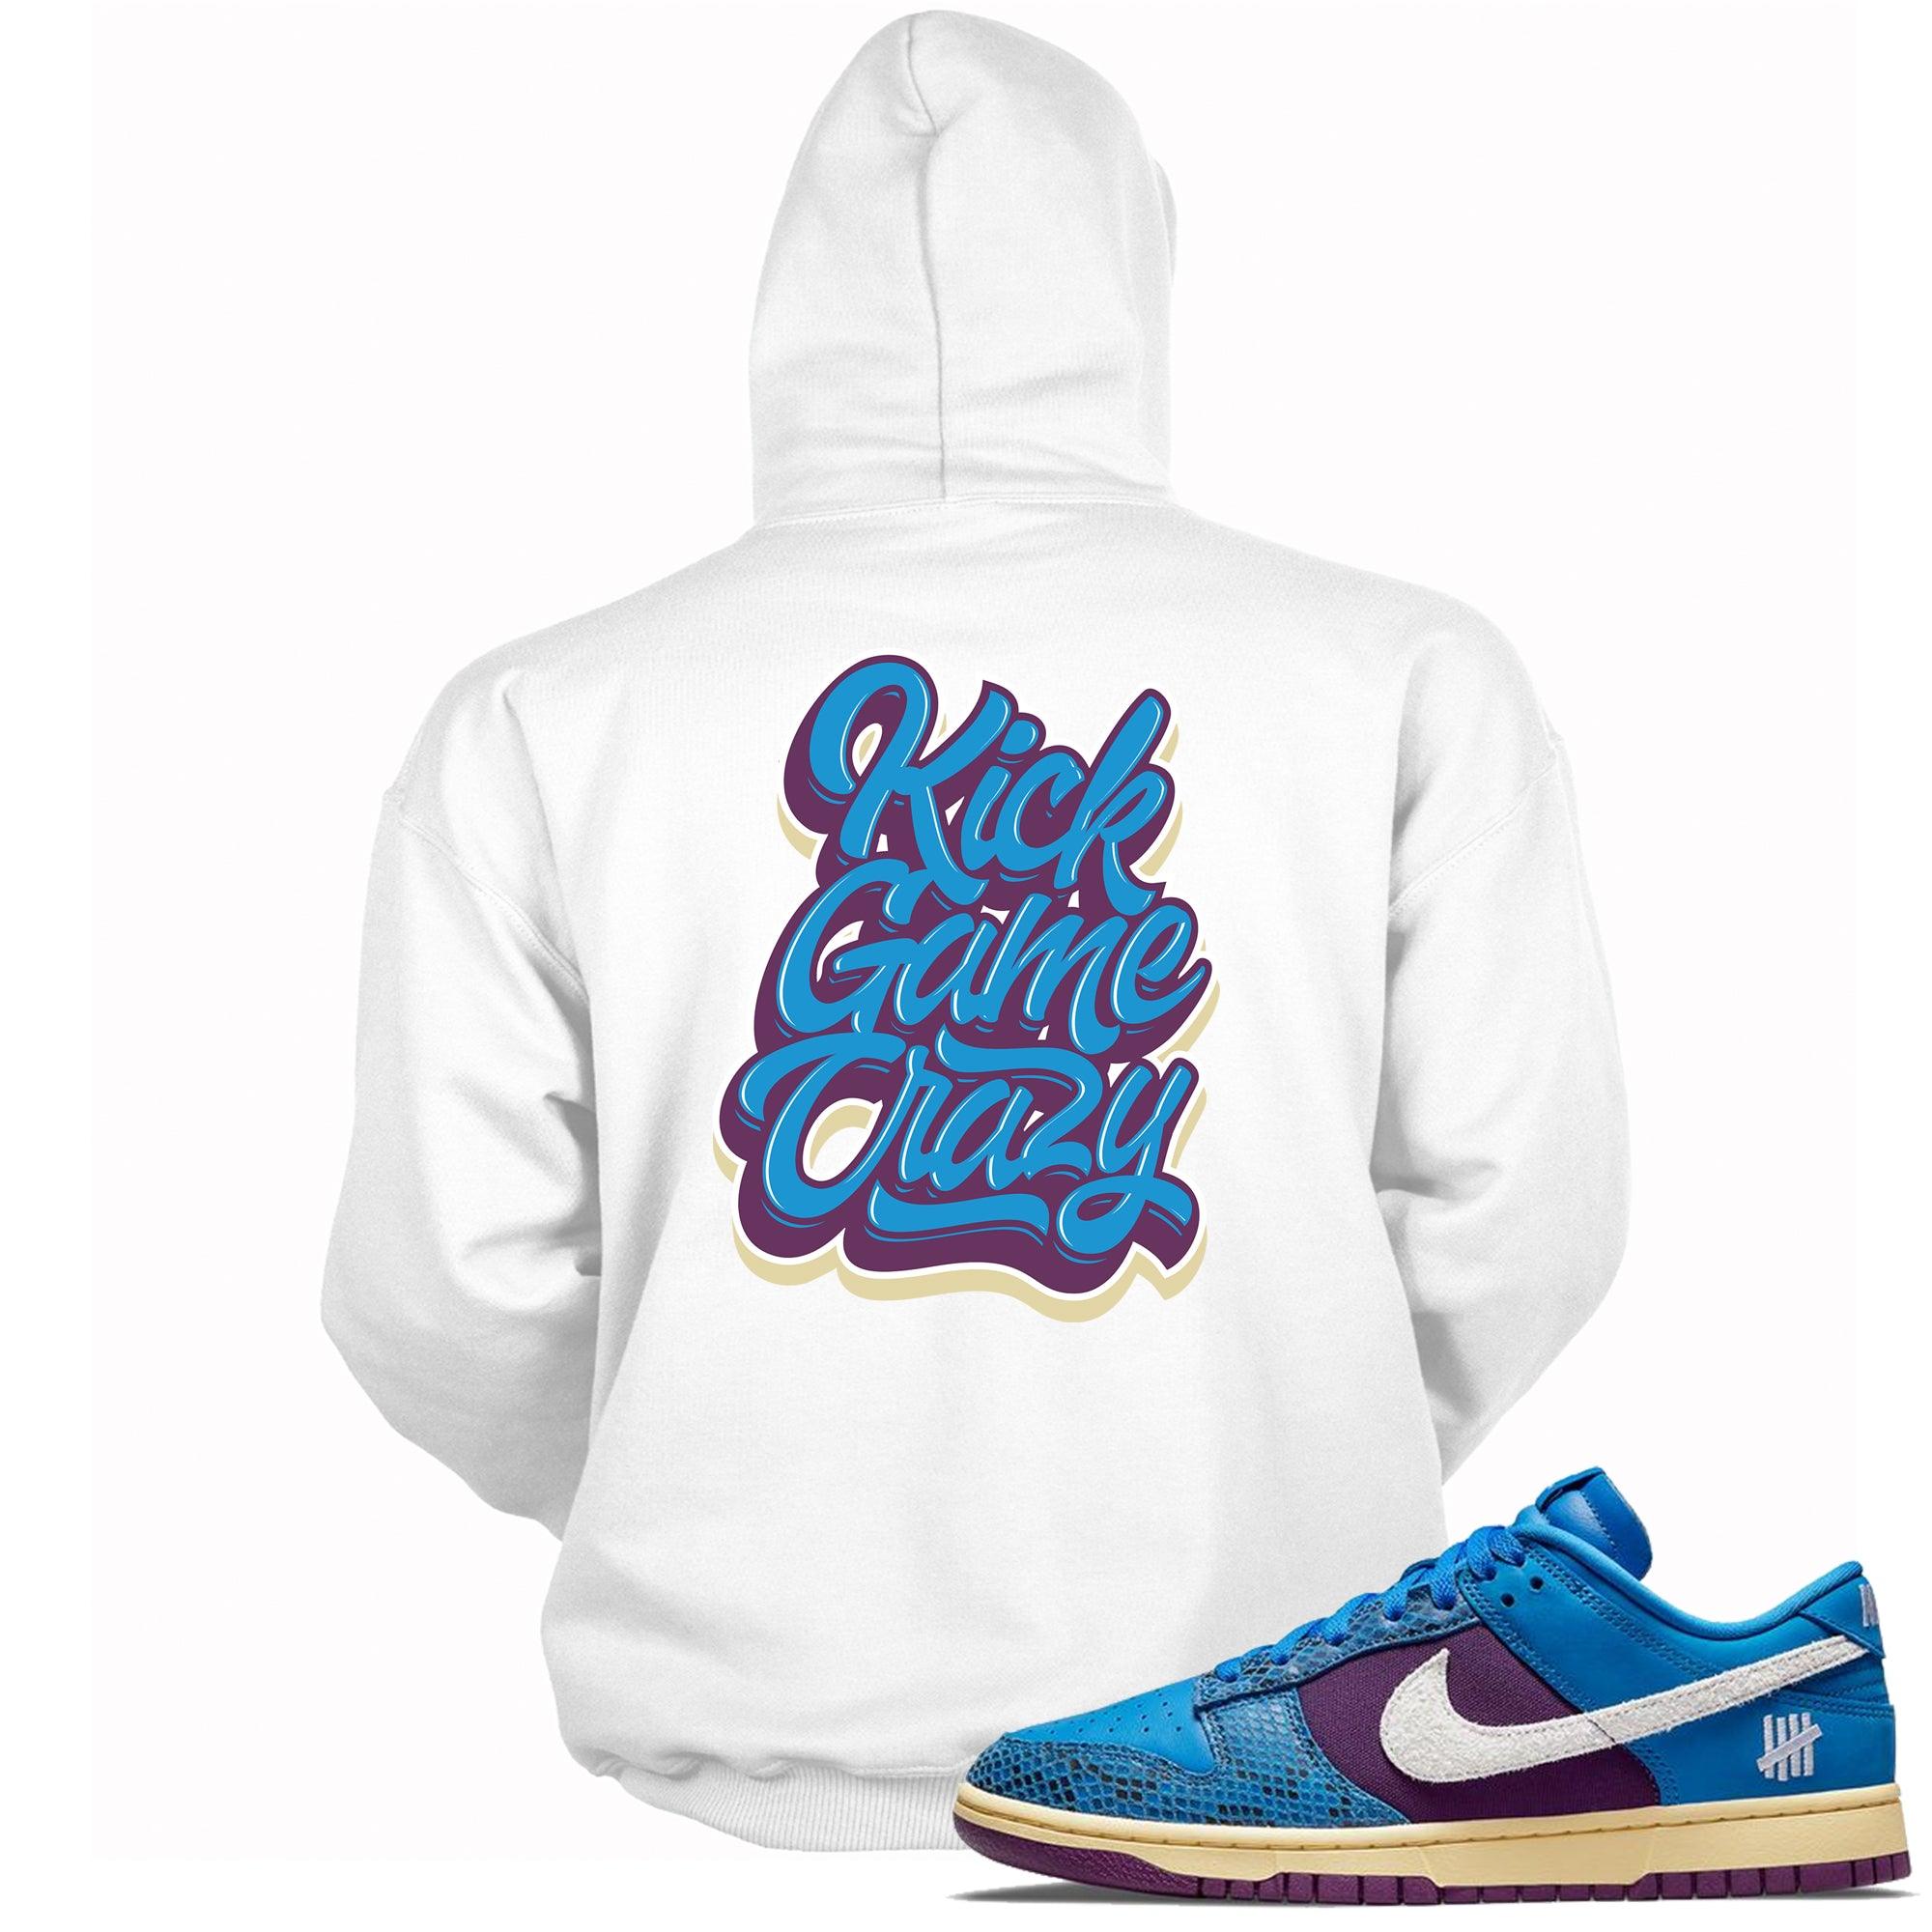 Kick Game Crazy Hoodie Nike Dunk Low Undefeated 5 On It Dunk vs AF1 photo